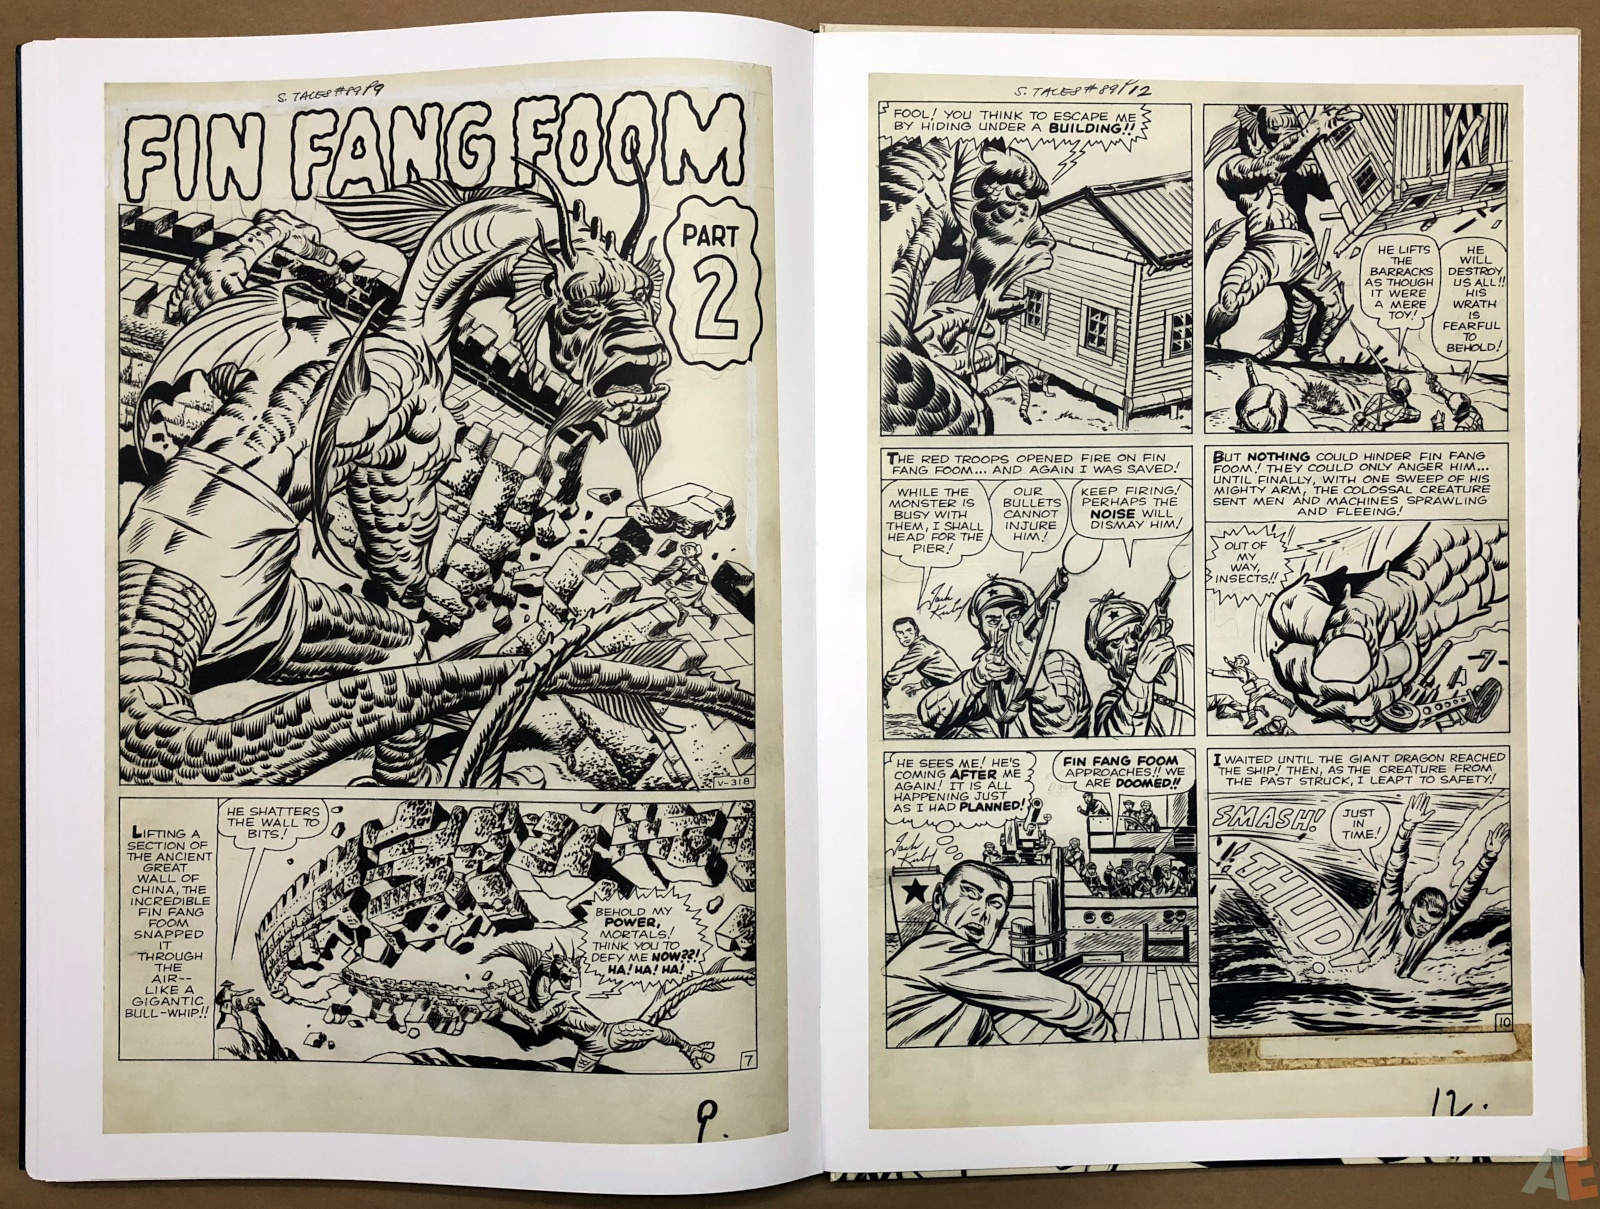 Jack Kirby's Marvel Heroes and Monsters Artist's Edition